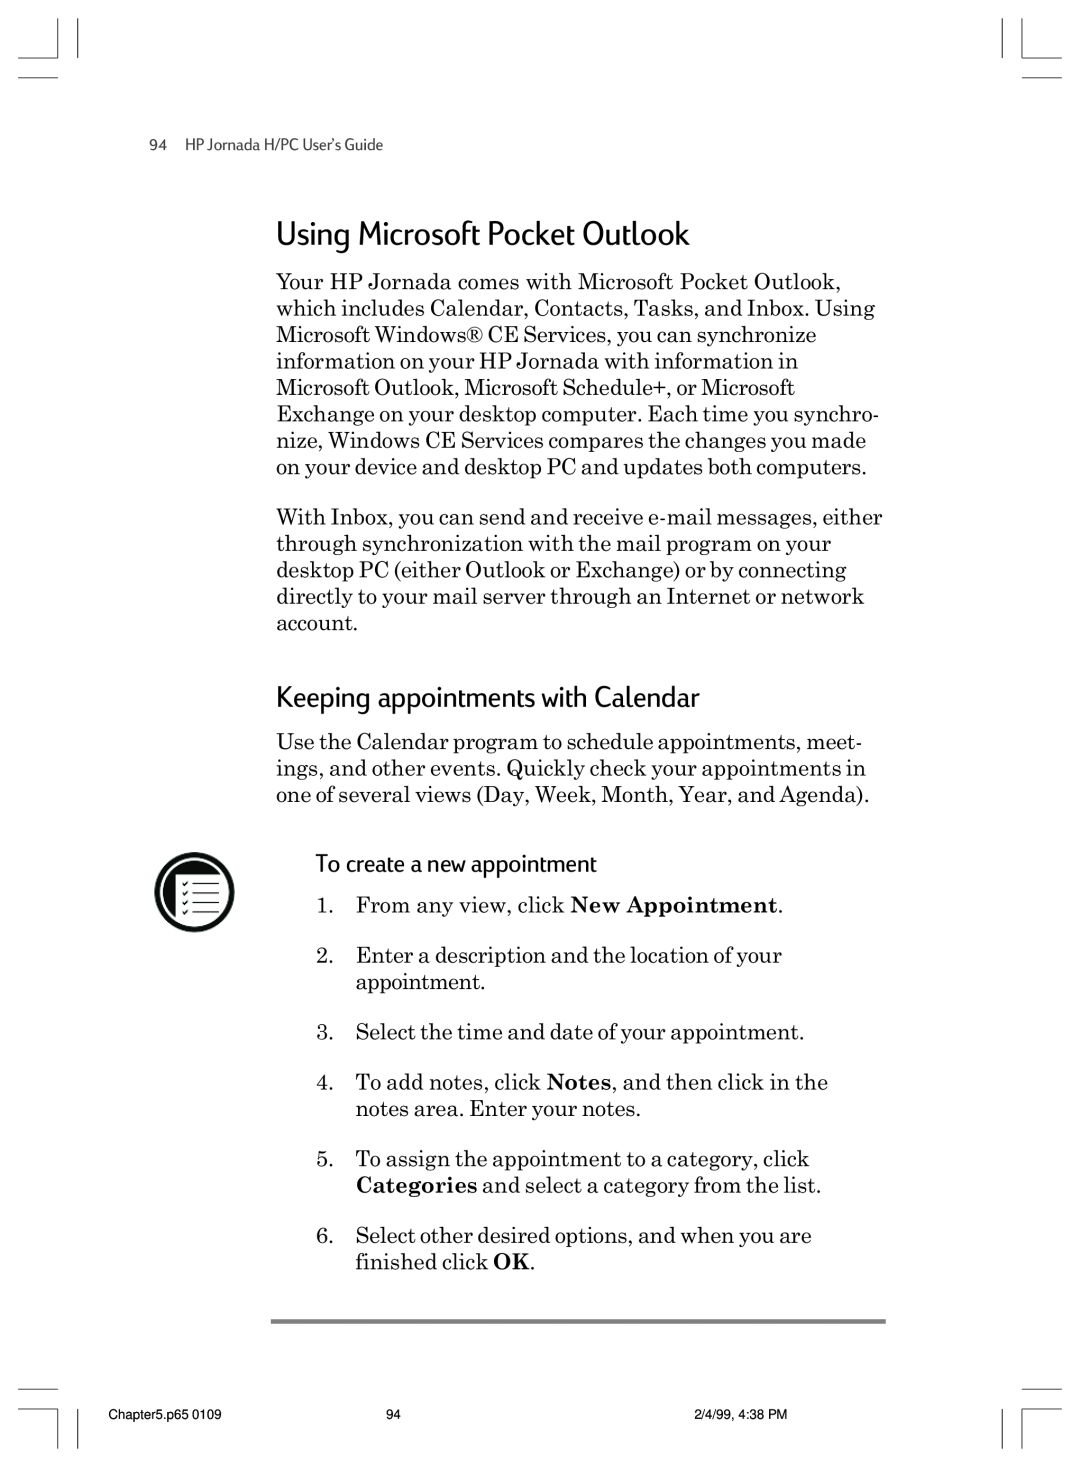 HP 820 E manual Using Microsoft Pocket Outlook, Keeping appointments with Calendar, To create a new appointment 